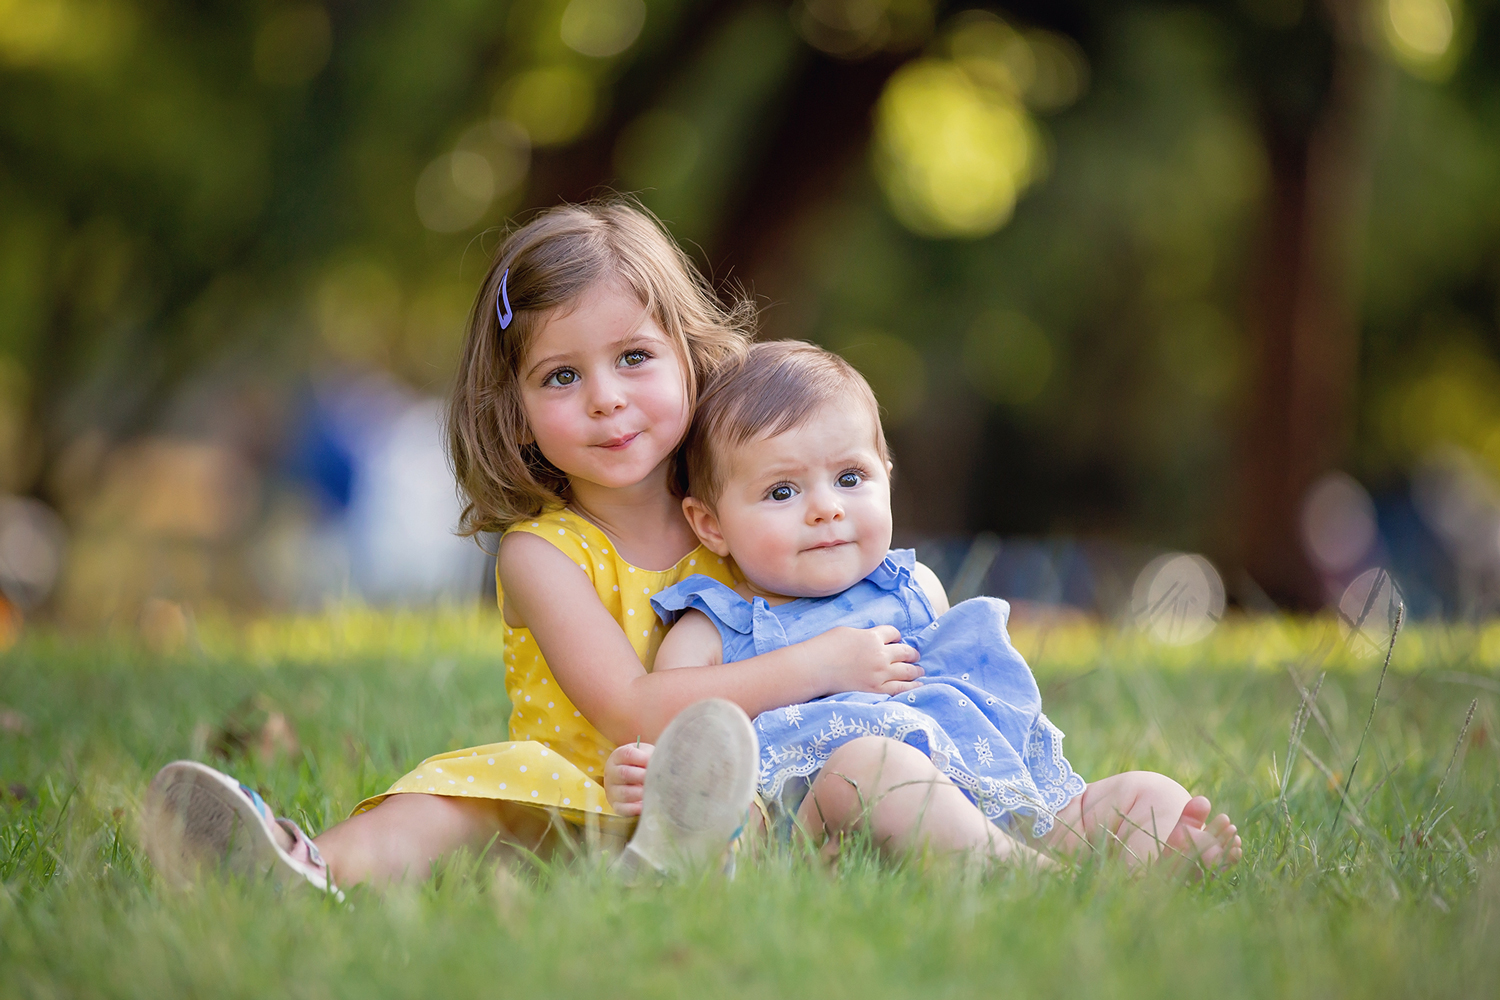 Perth Family Photographer - My Top 7 Locations to Photograph Families ...